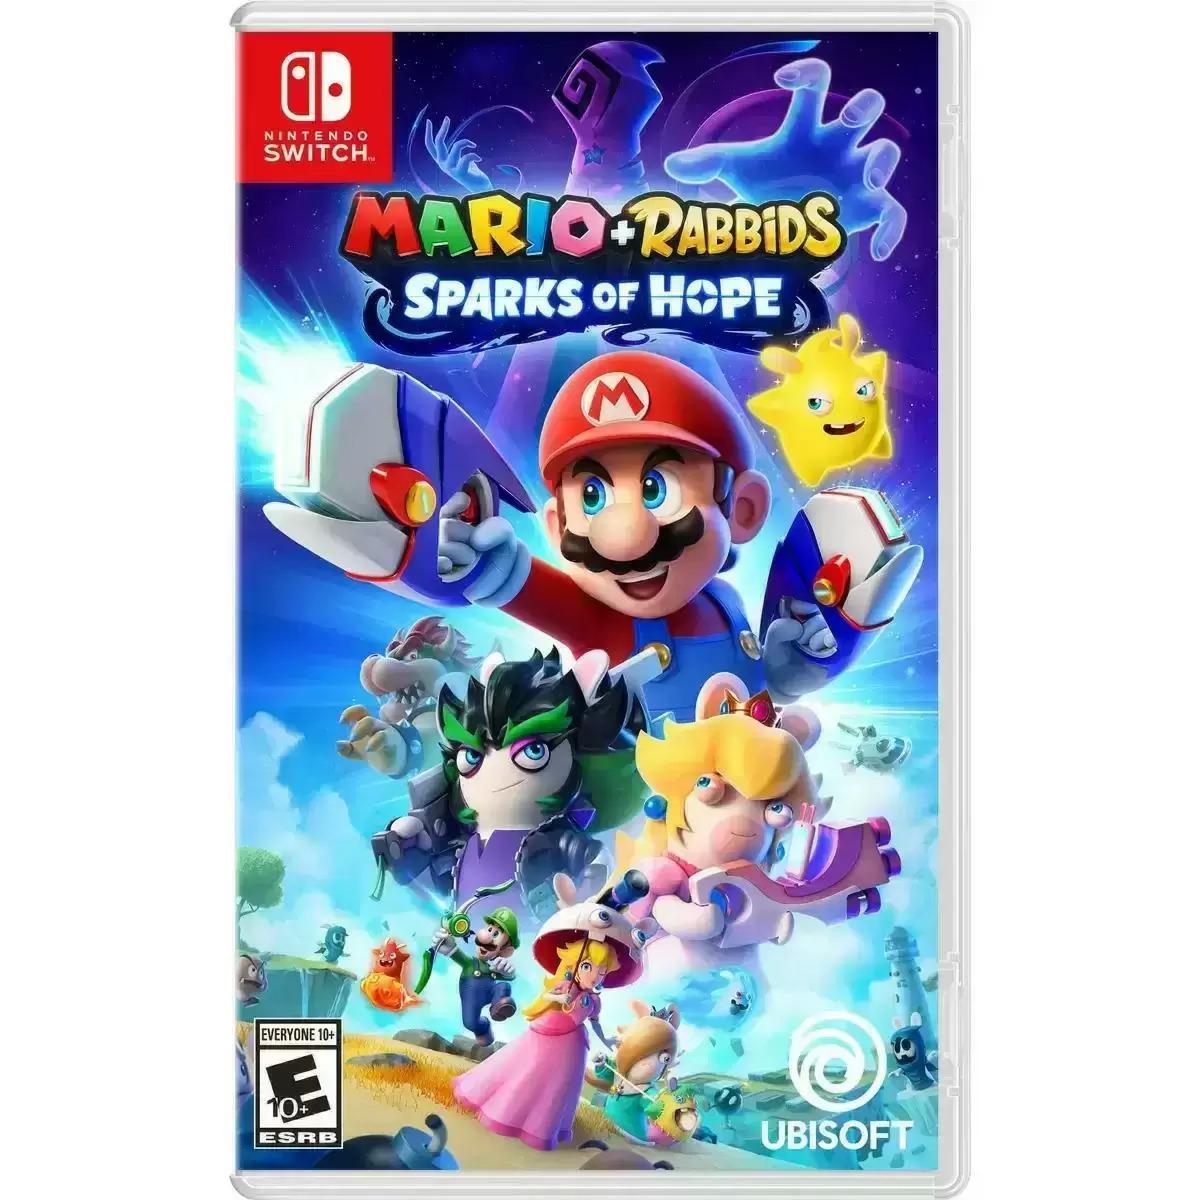 Mario + Rabbids Sparks of Hope Nintendo Switch for $19.99 Shipped